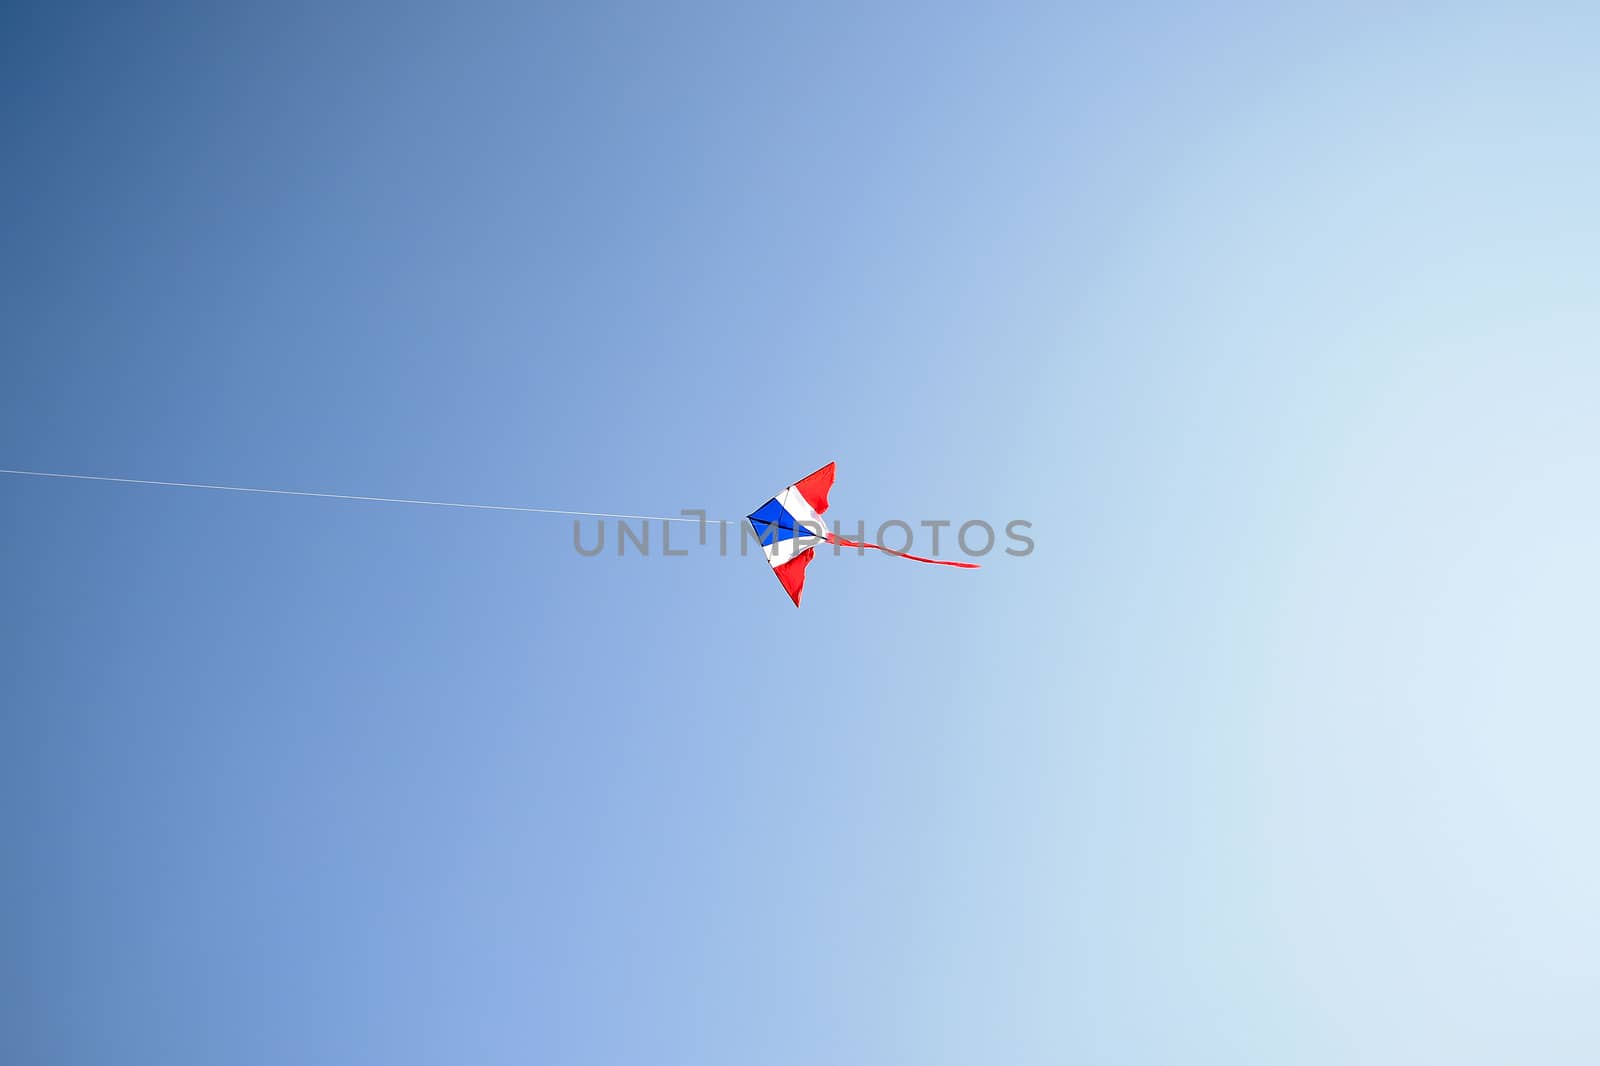 Kite flying in the wind and clear sky with copy space